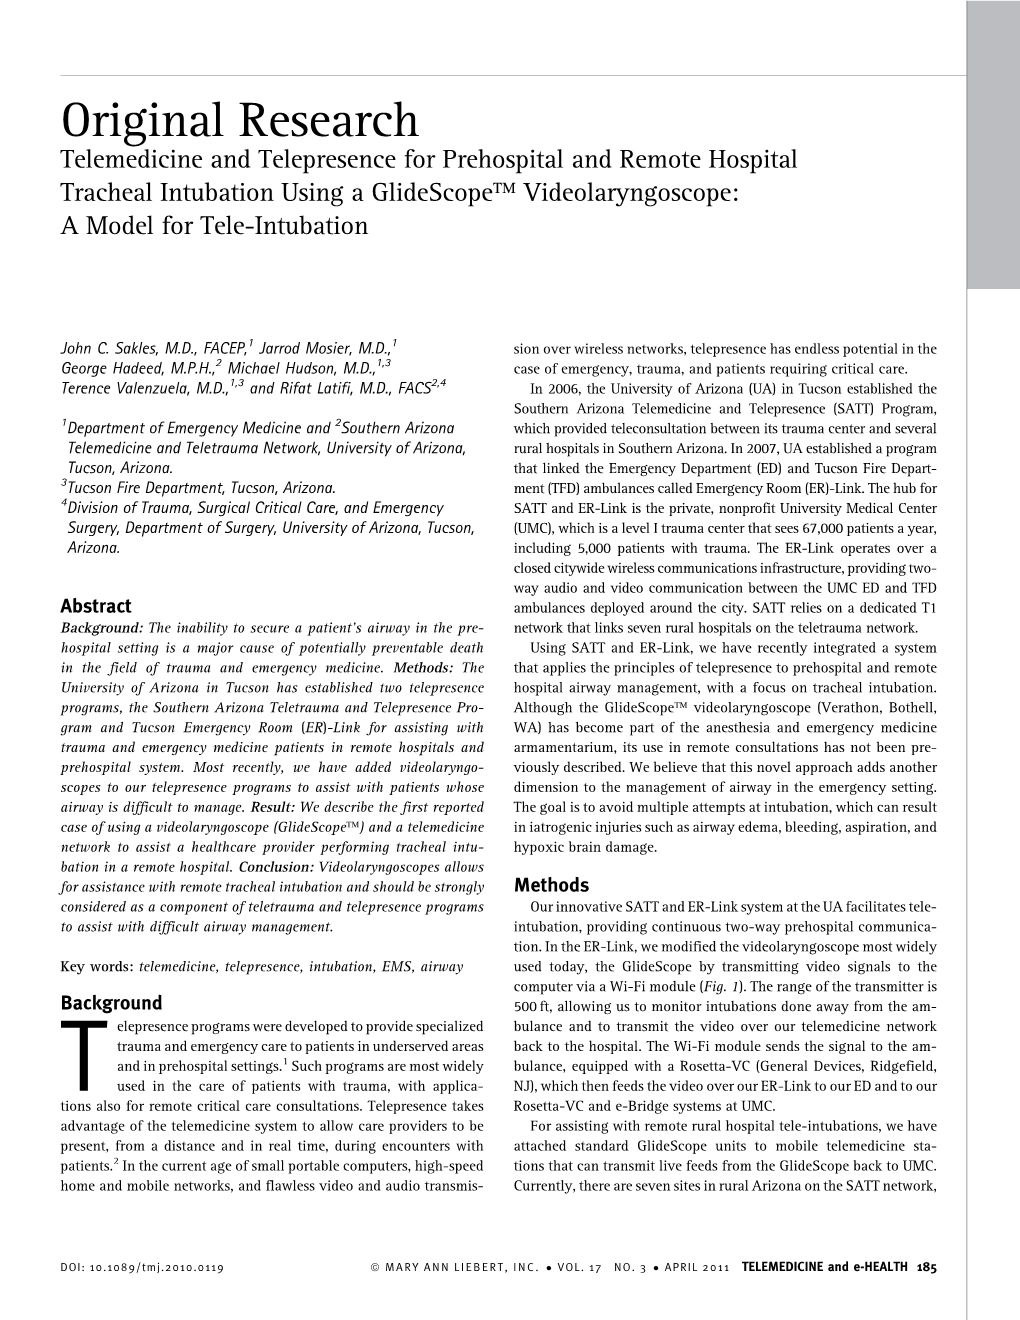 Telemedicine and Telepresence for Prehospital and Remote Hospital Tracheal Intubation Using a Glidescope� Videolaryngoscope: a Model for Tele-Intubation